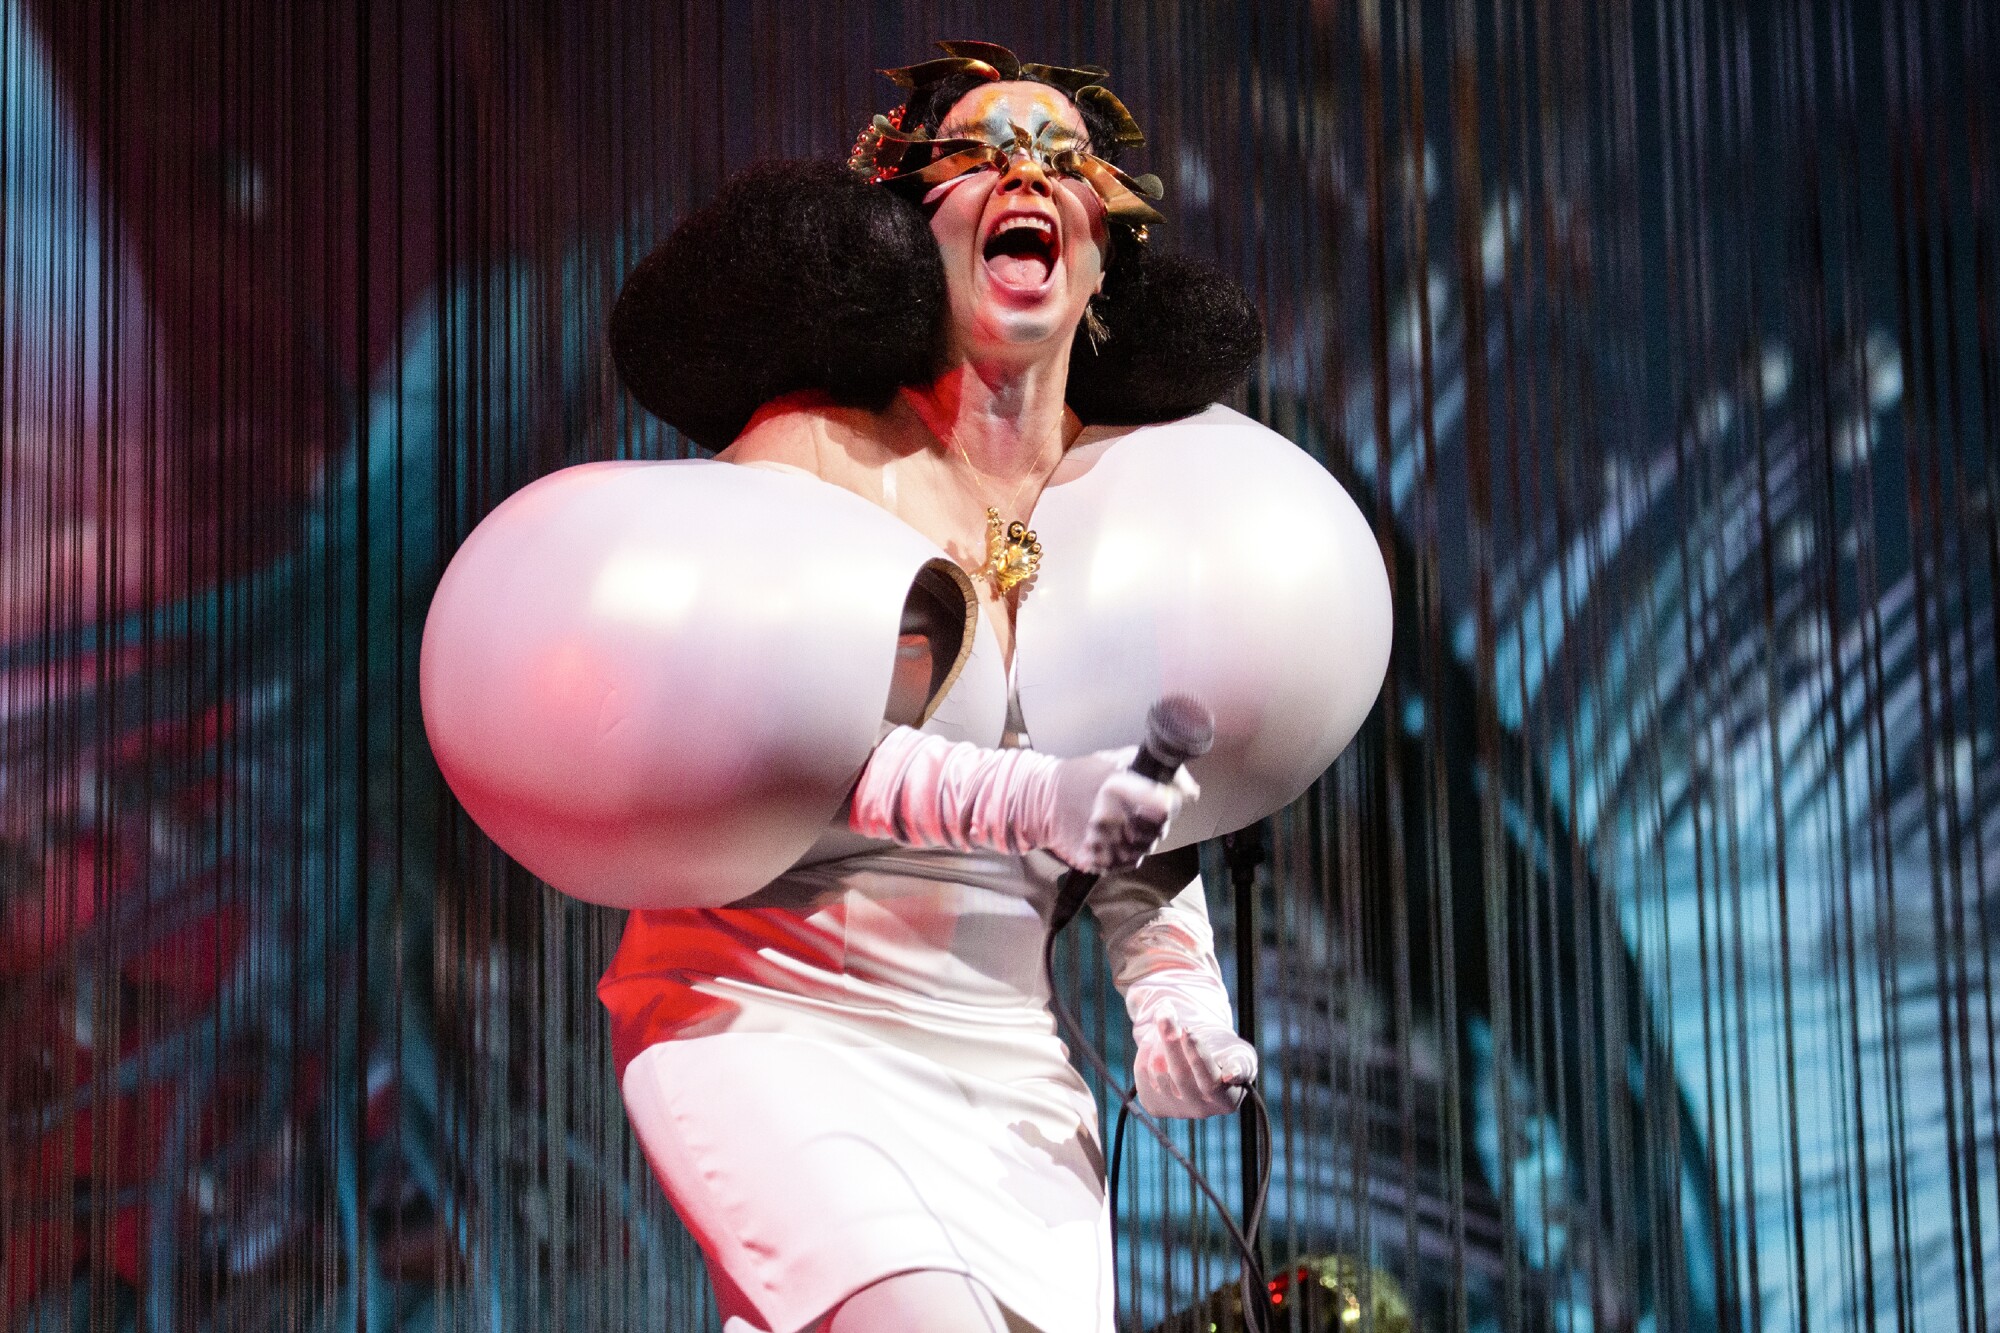 A woman performs onstage in a white inflatable dress.